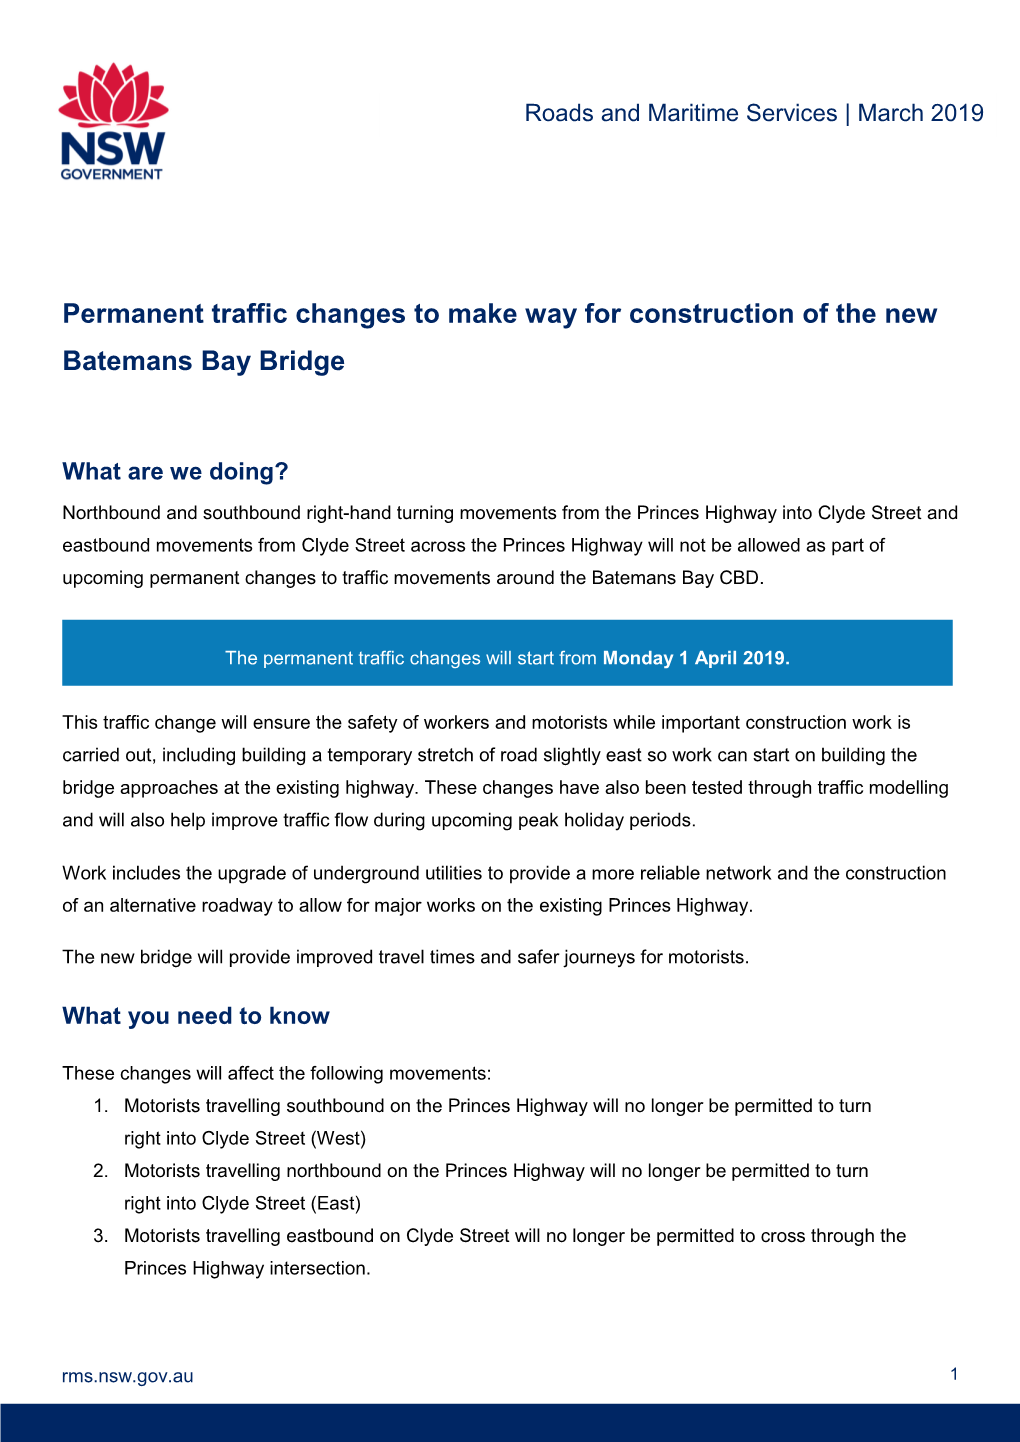 Permanent Traffic Changes to Make Way for Construction of the New Batemans Bay Bridge